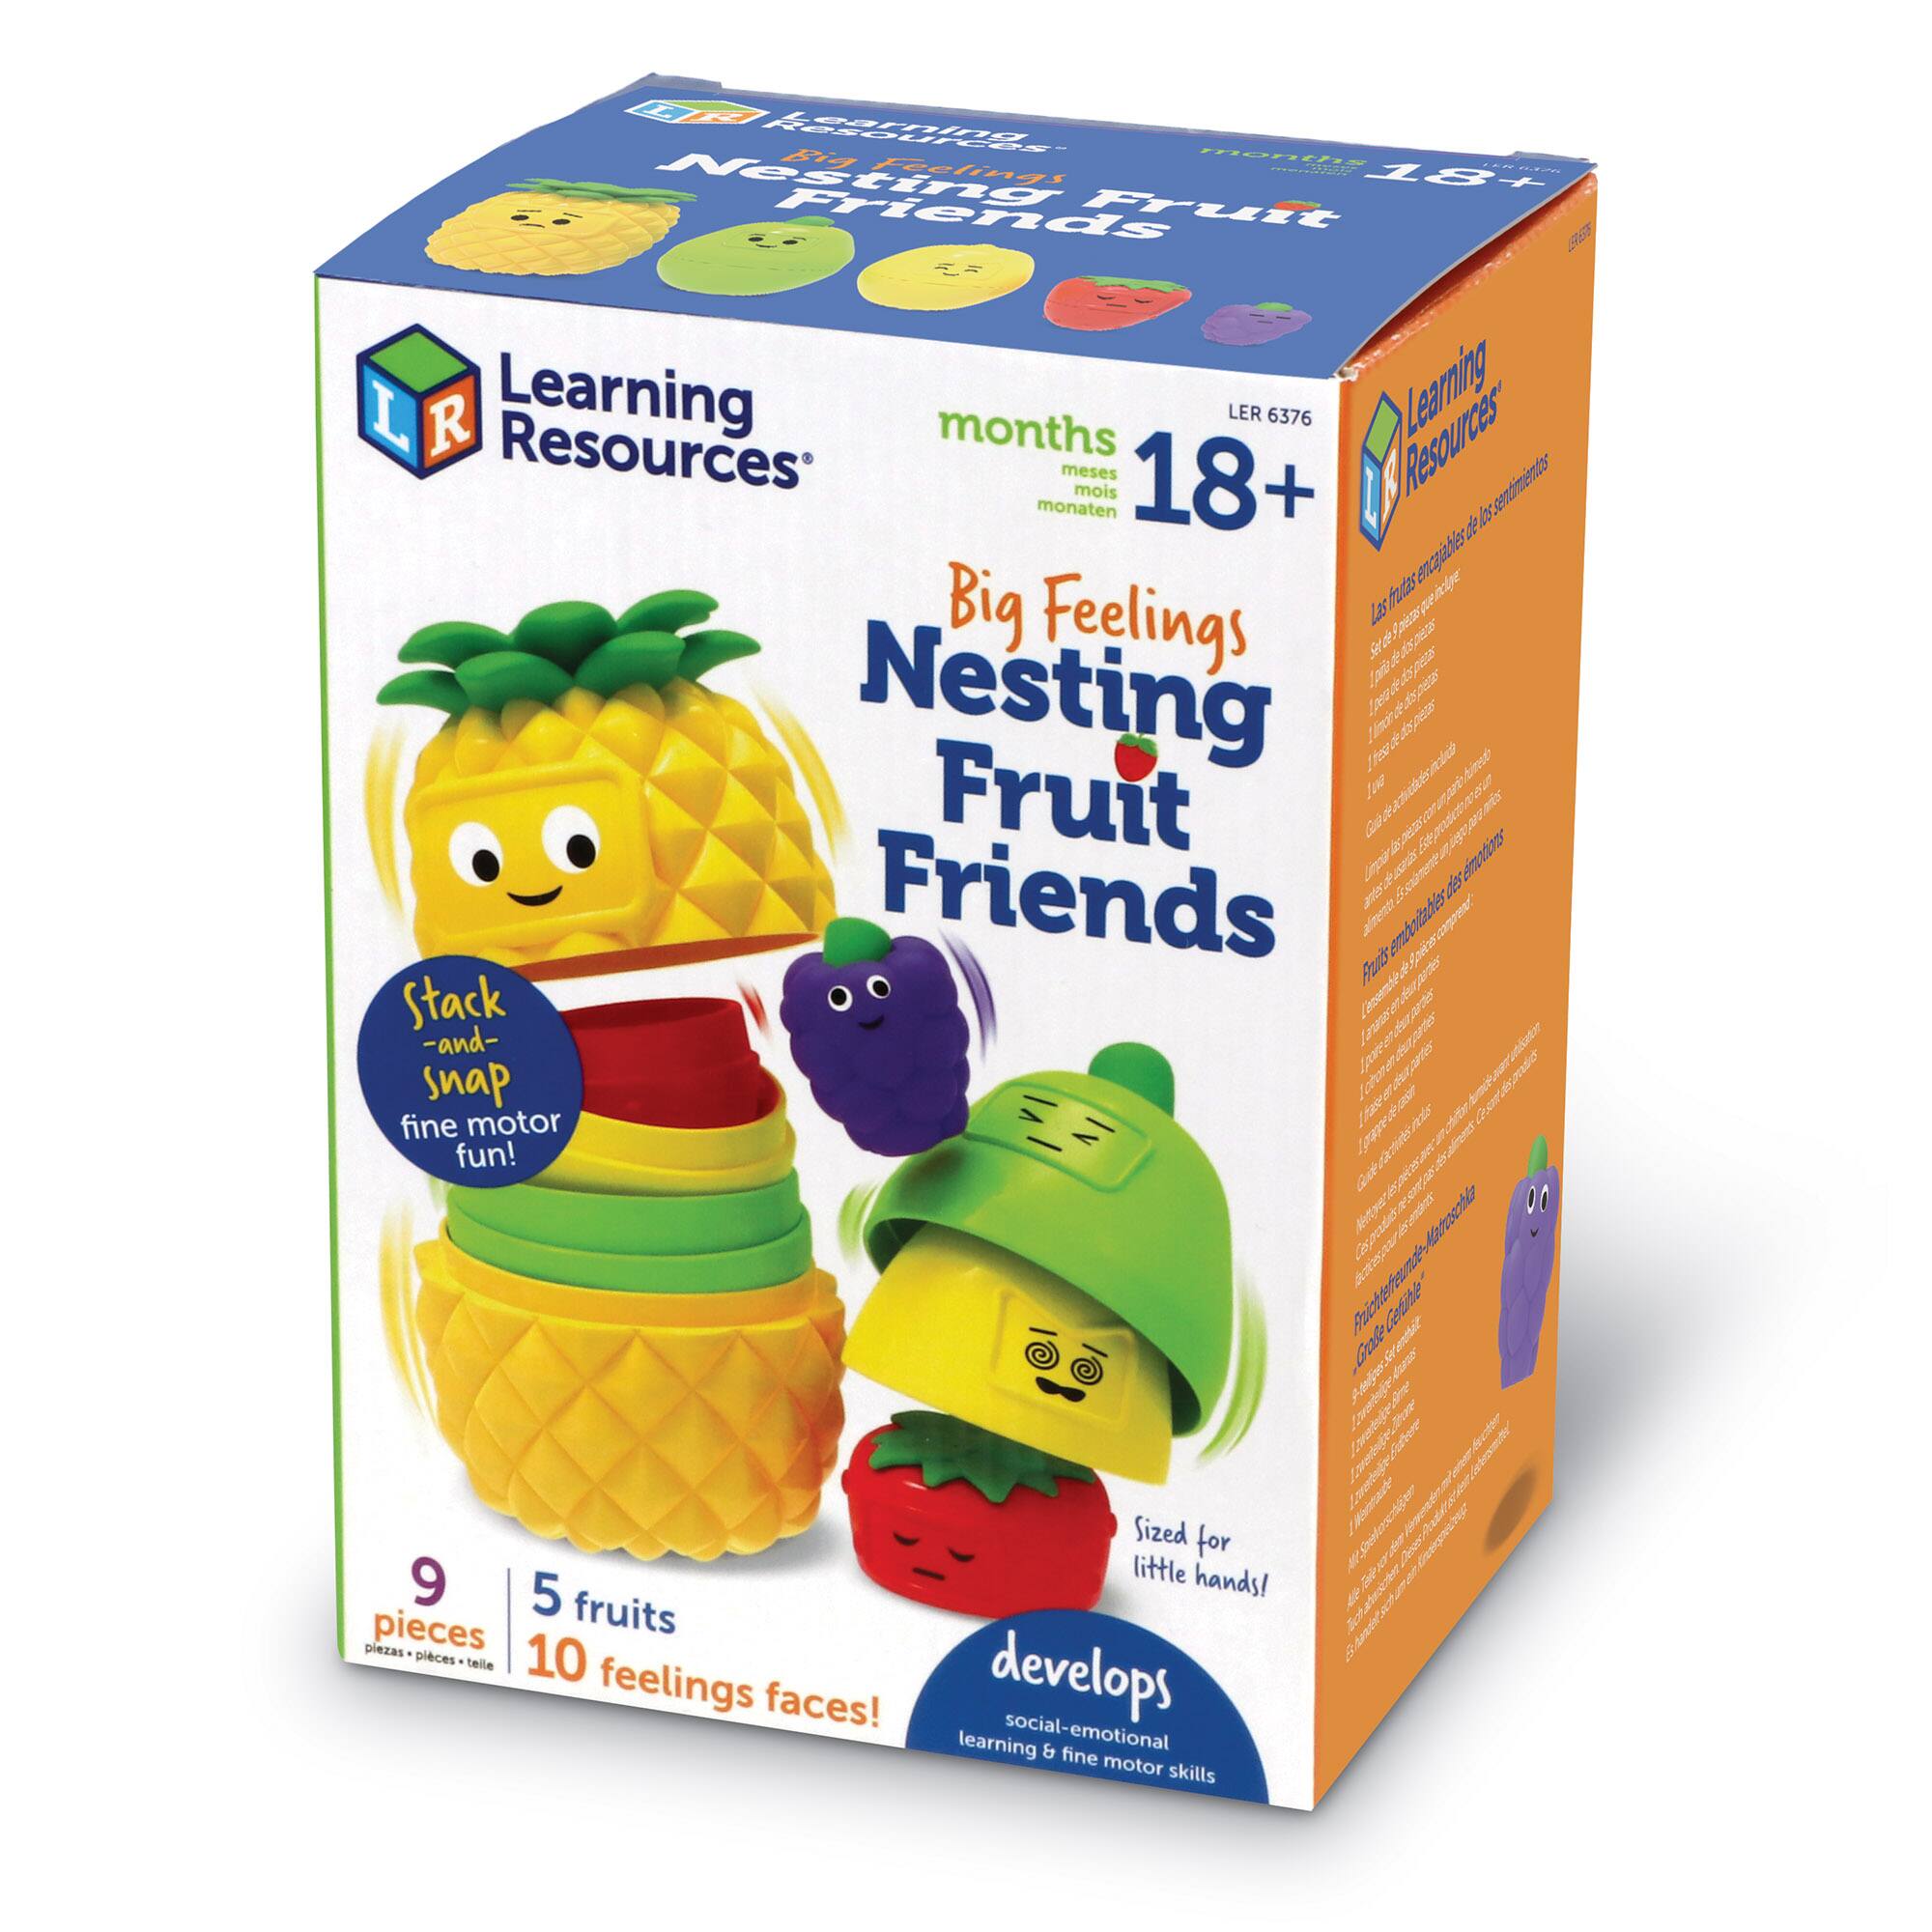 Learning Resources Big Feelings Nesting Fruit Friends Activity Kit